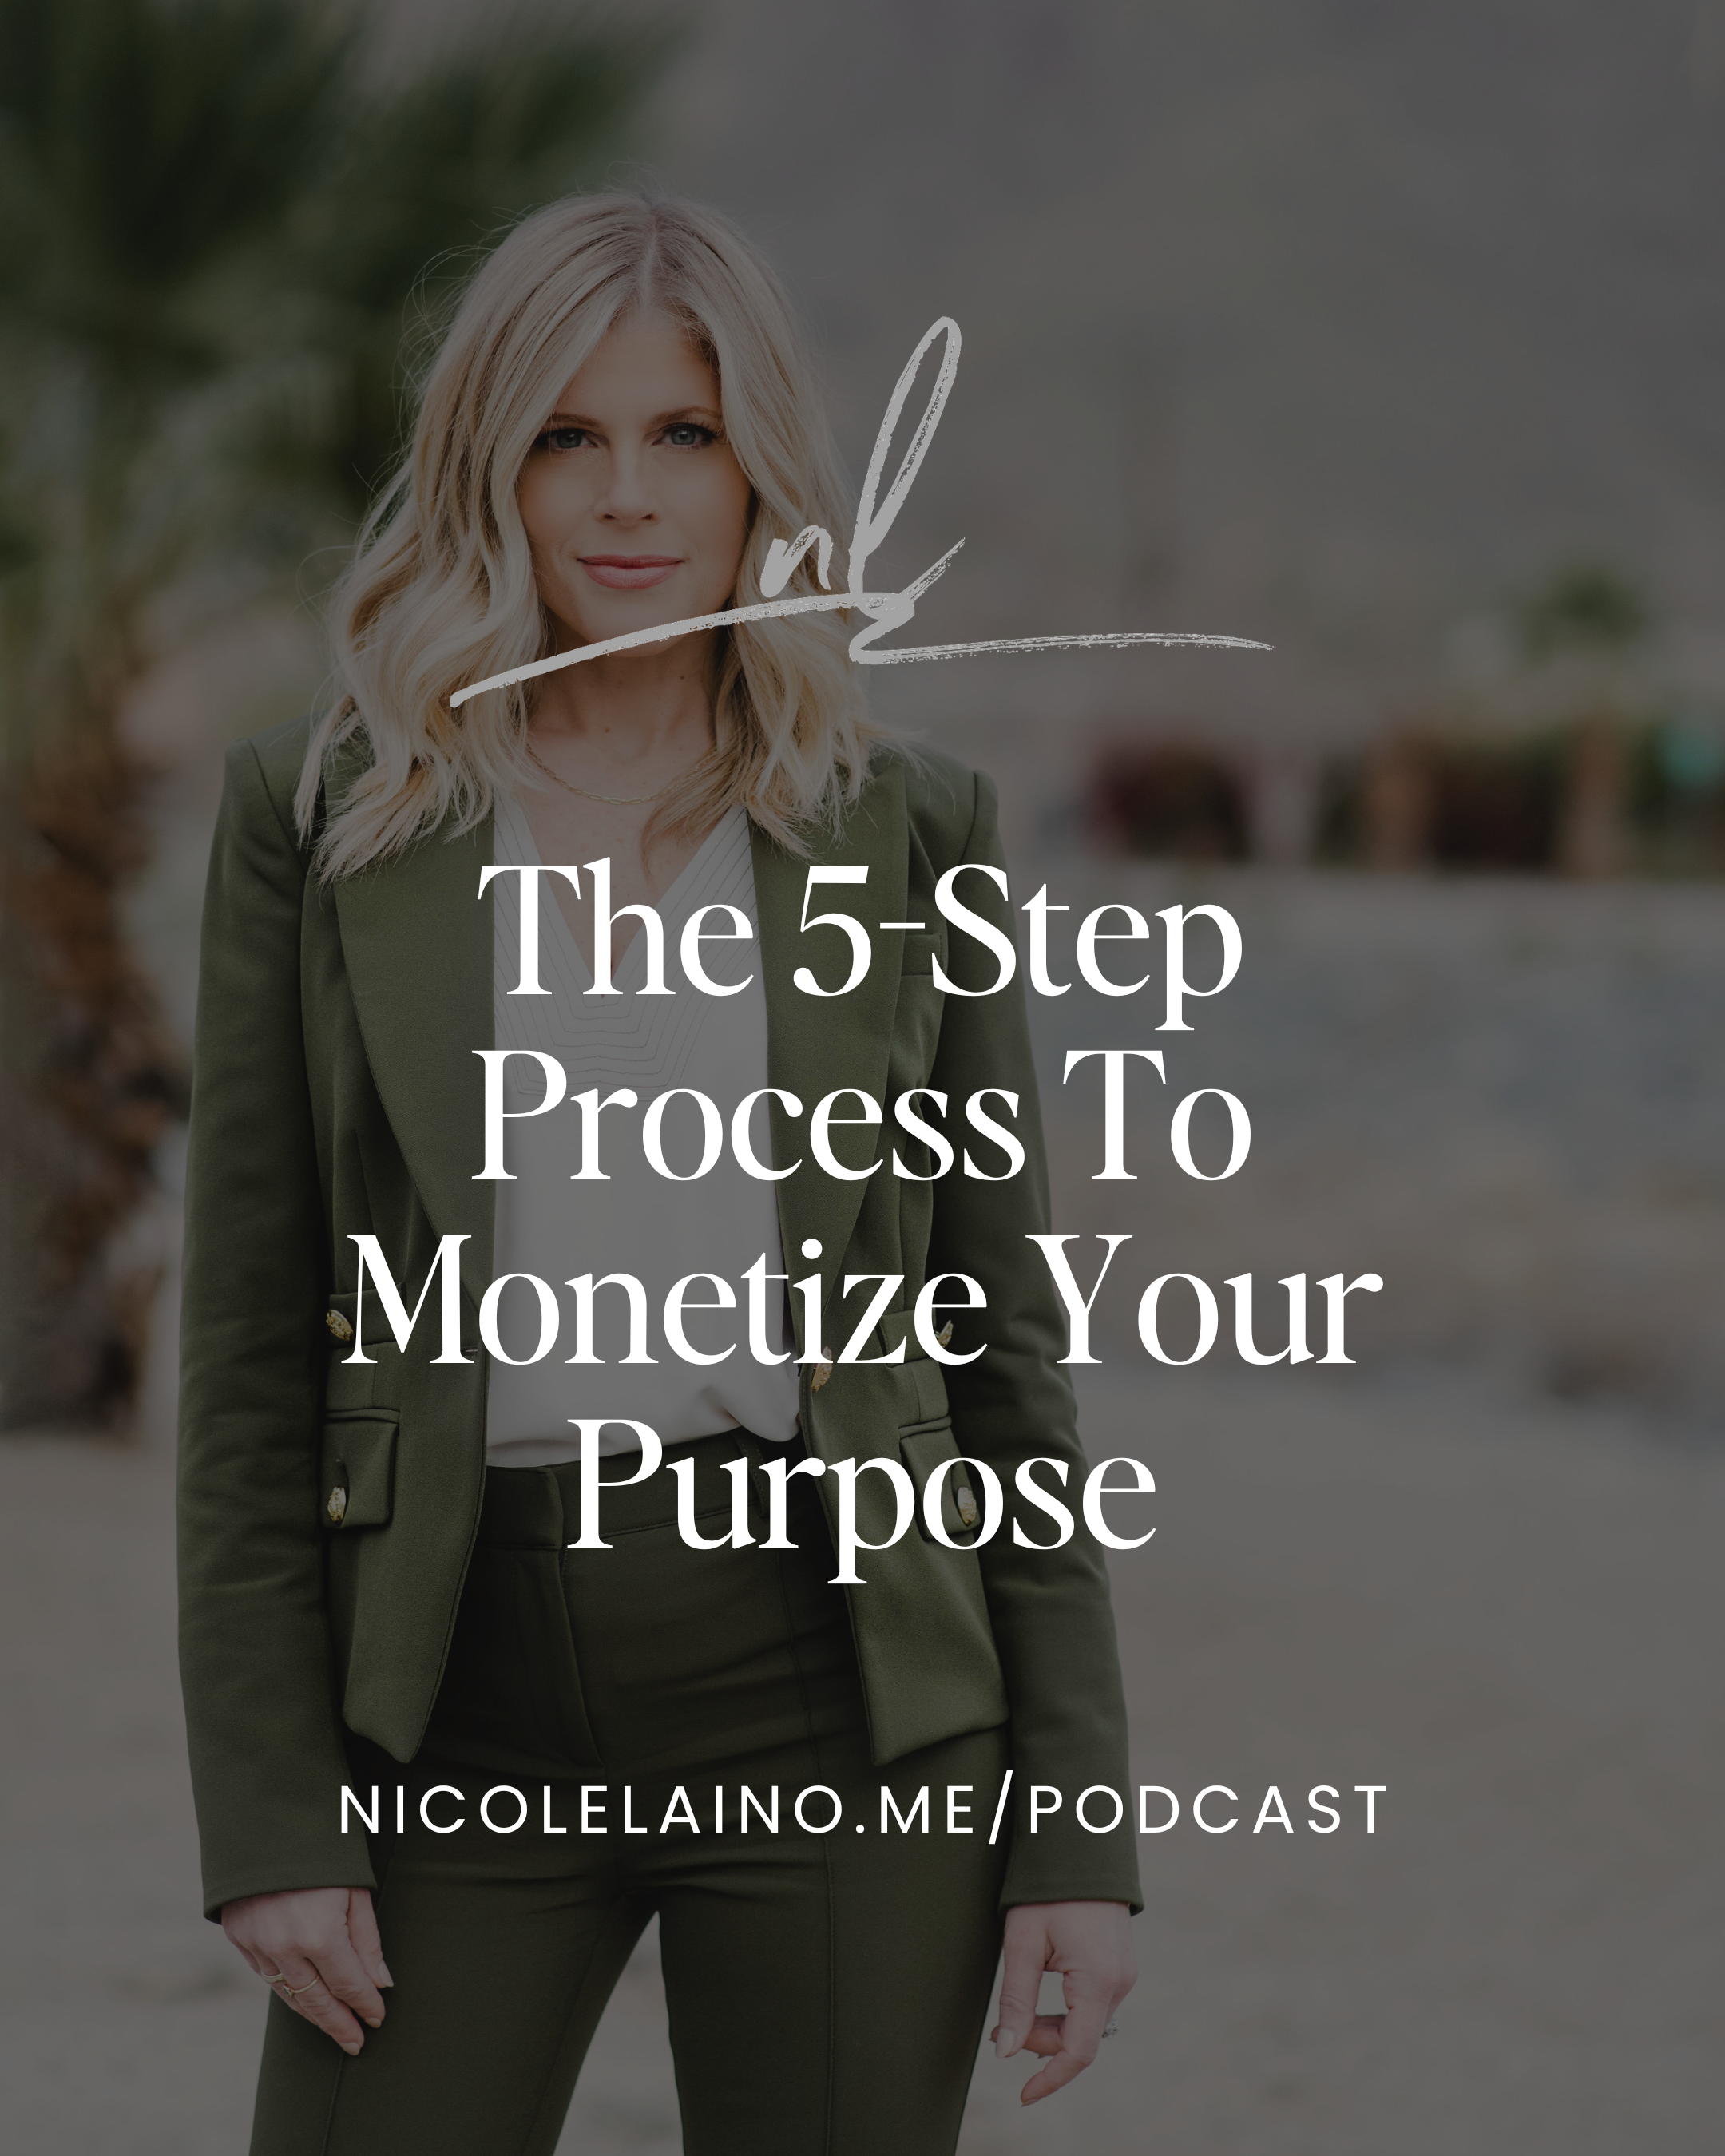 The 5-Step Process To Monetize Your Purpose